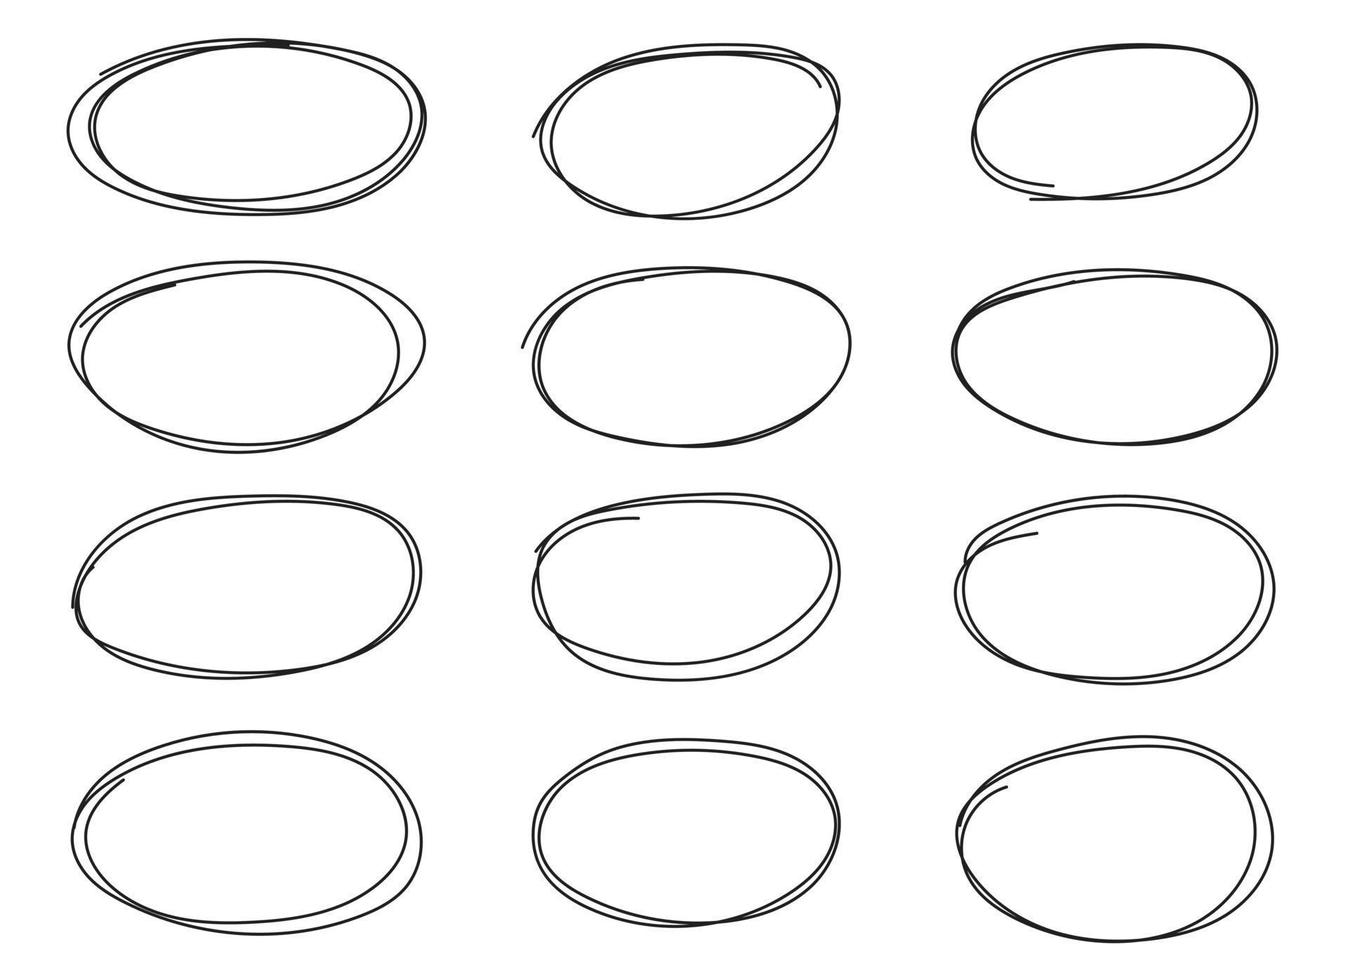 Hand drawn circle highlighting vector set isolated on white